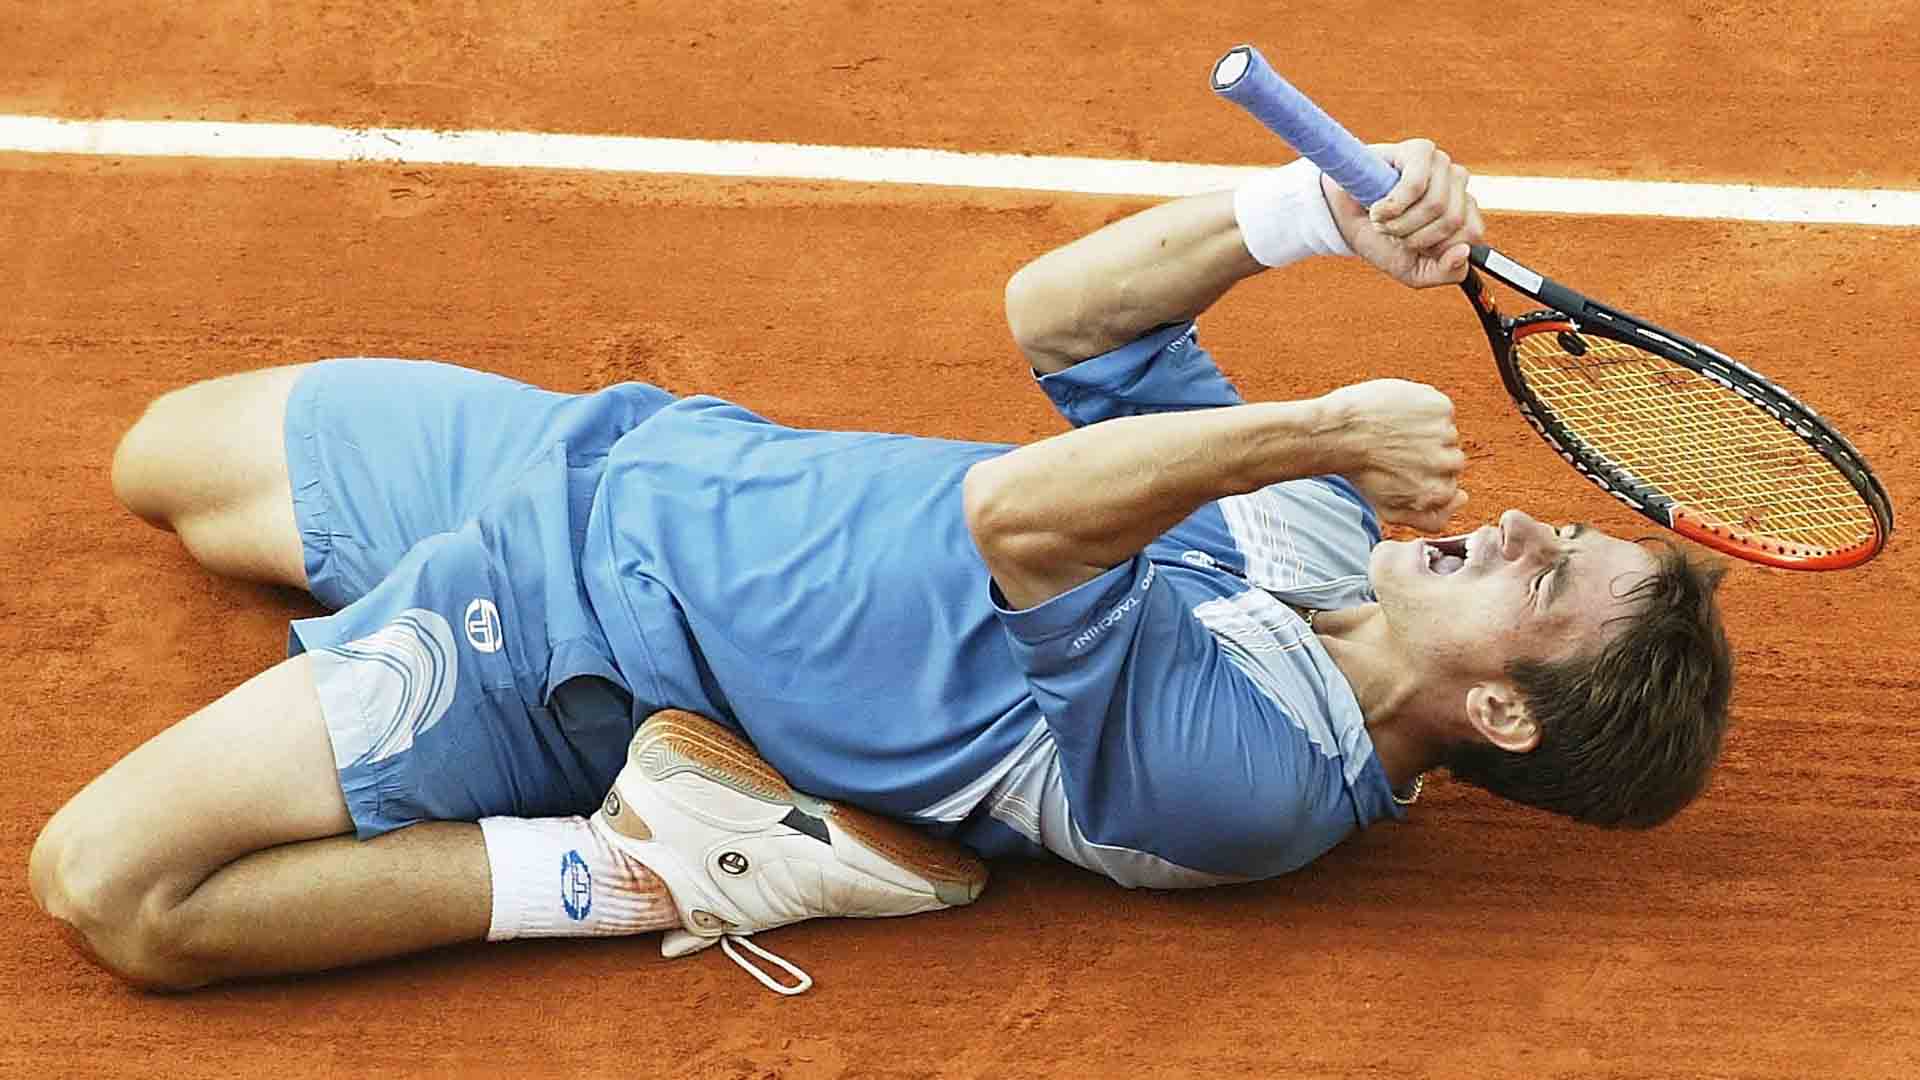 Tommy Robredo beat Lleyton Hewitt and Gustavo Kuerten in back-to-back matches to reach his first Roland Garros quarter-final in 2003.